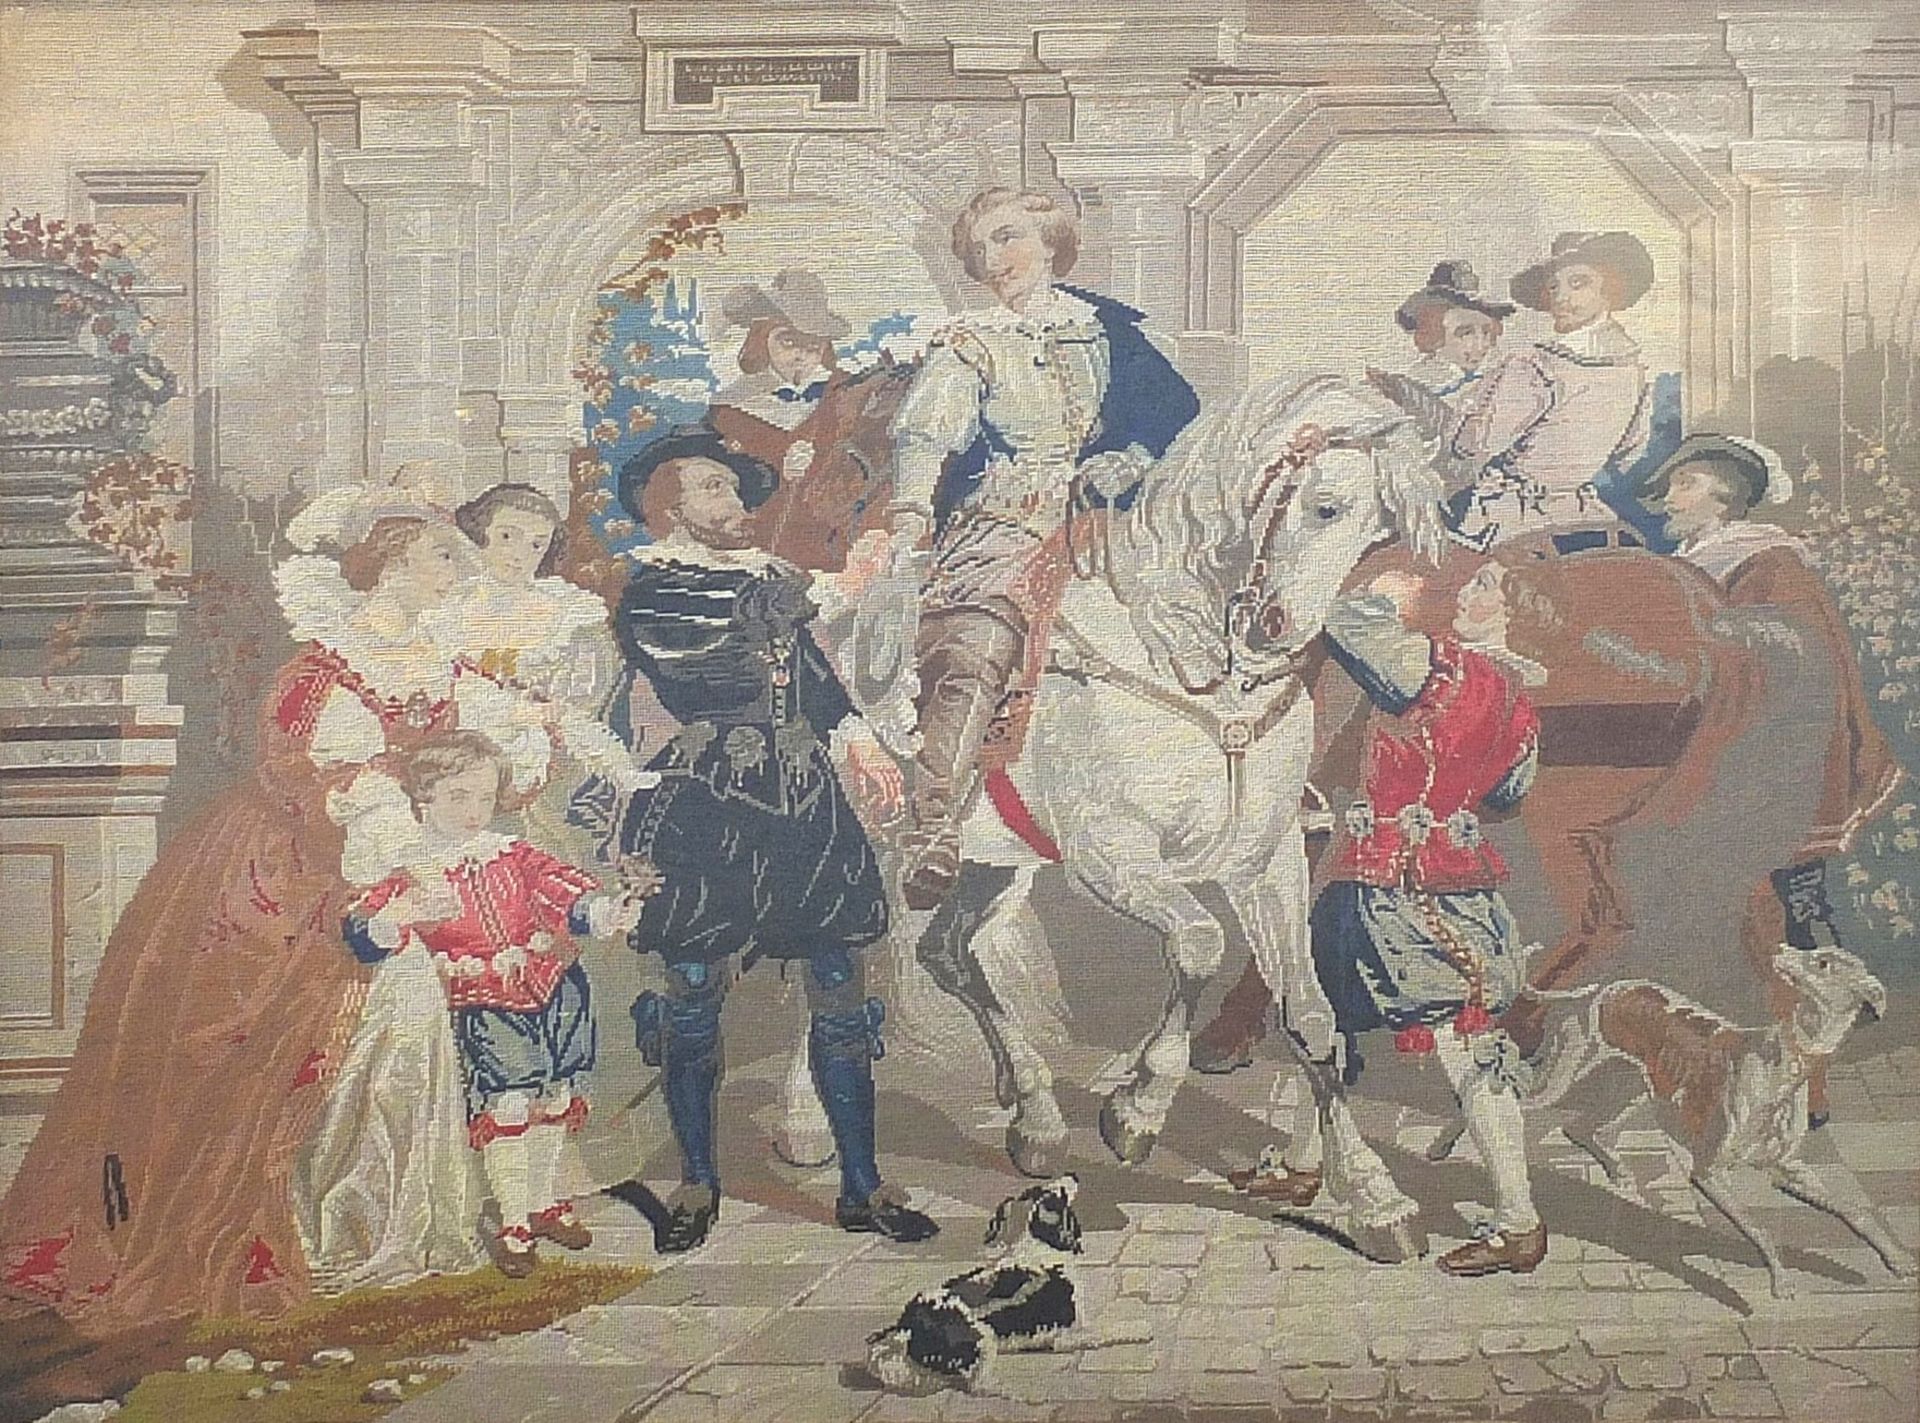 19th century Berlin wool work tapestry depicting 17th century figures, housed in an ornate gilt - Bild 2 aus 3